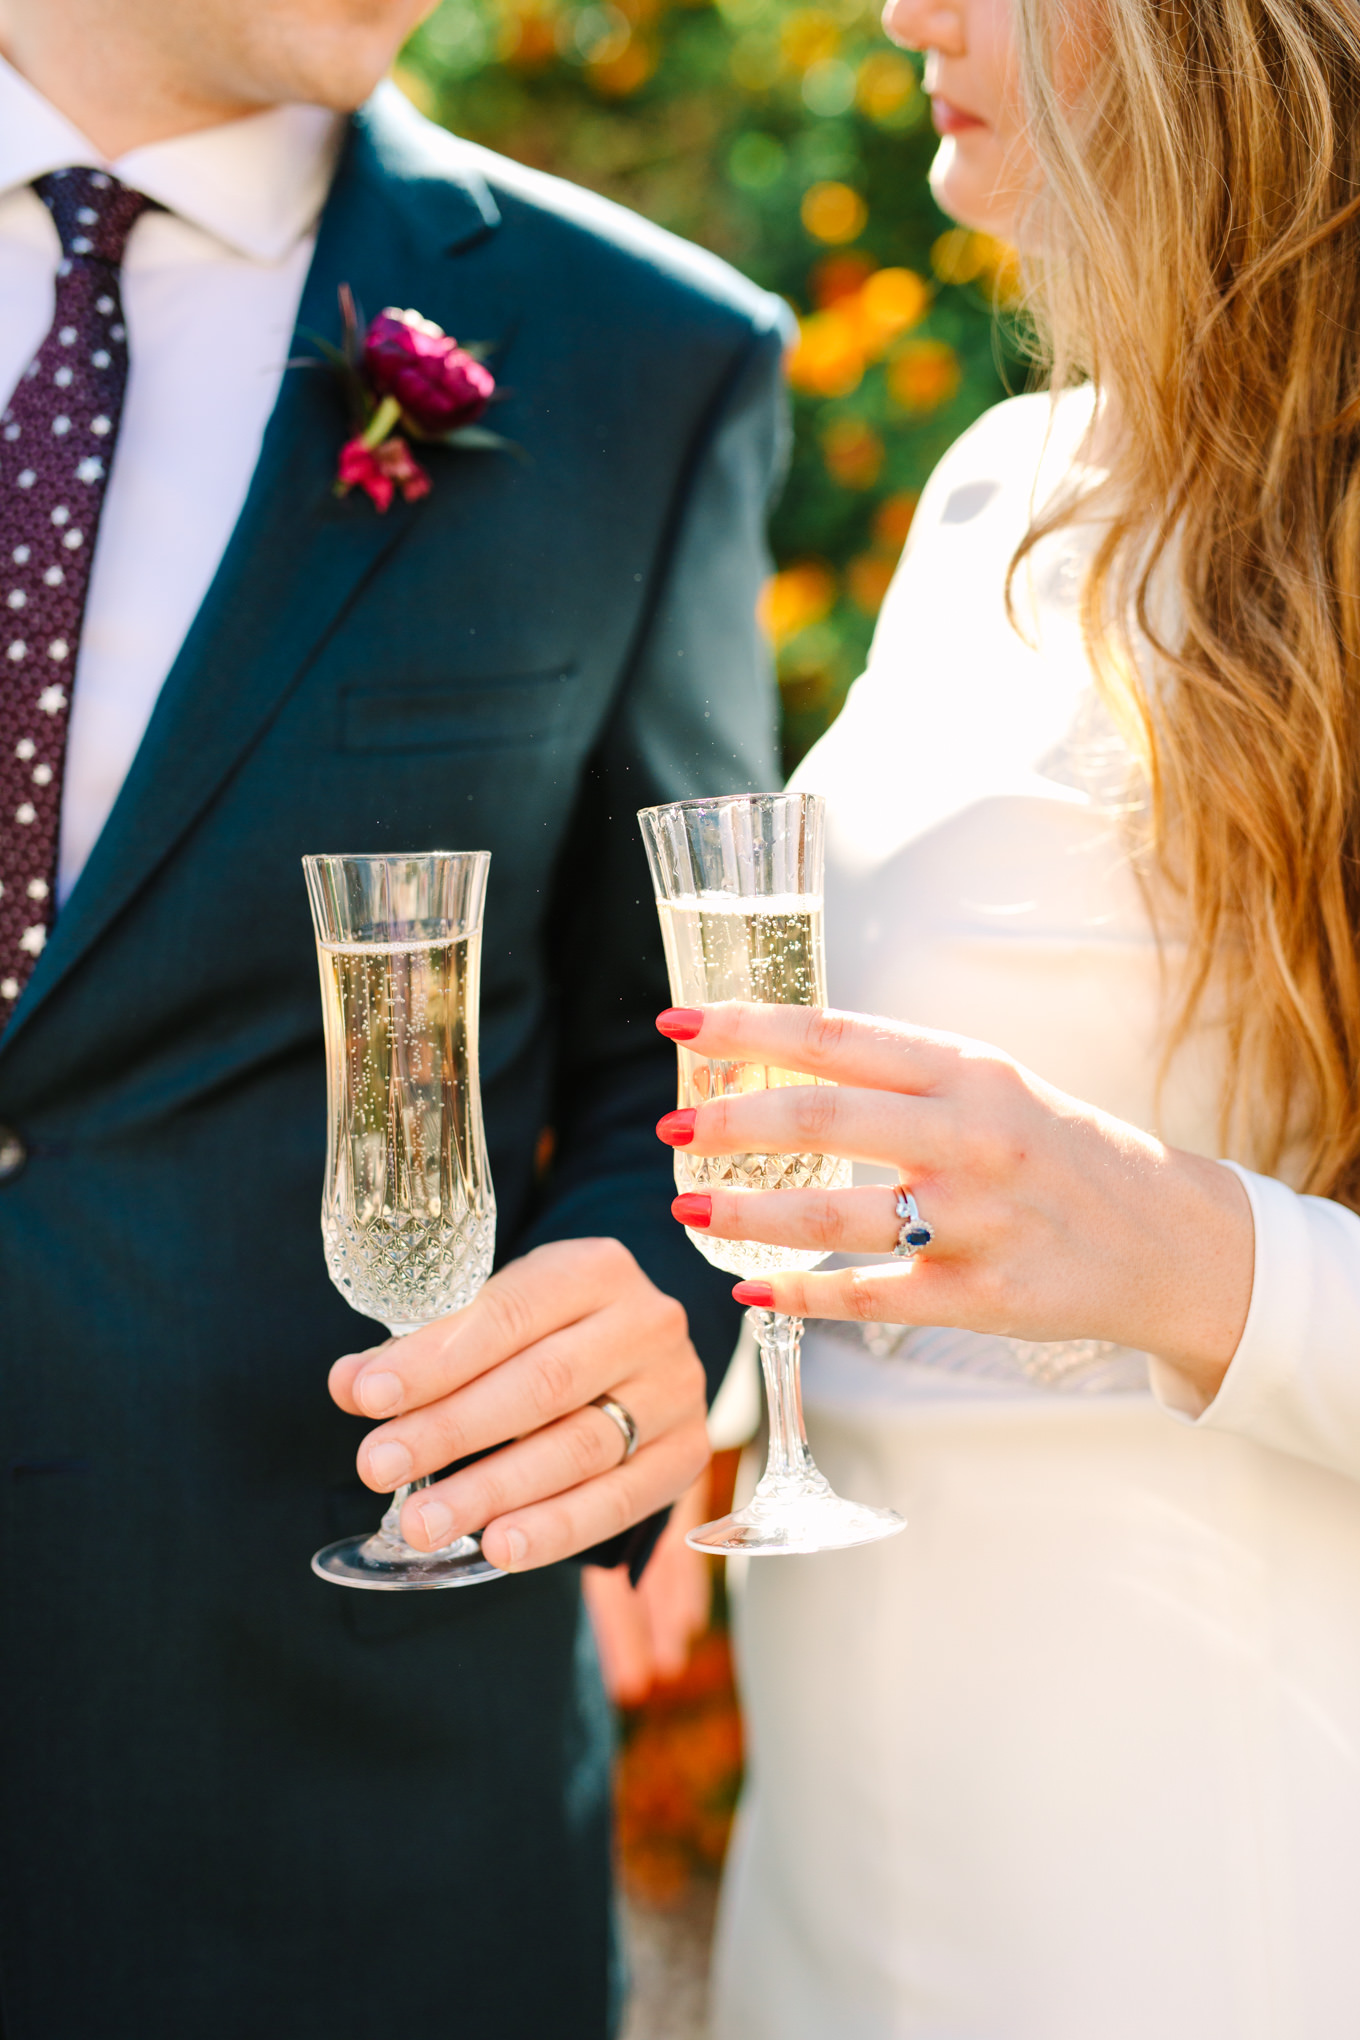 Bride and groom drinking champagne at Saguaro Palm Springs | Colorful jewel tone Palm Springs elopement | Fresh and colorful photography for fun-loving couples in Southern California | #colorfulelopement #palmspringselopement #elopementphotography #palmspringswedding Source: Mary Costa Photography | Los Angeles